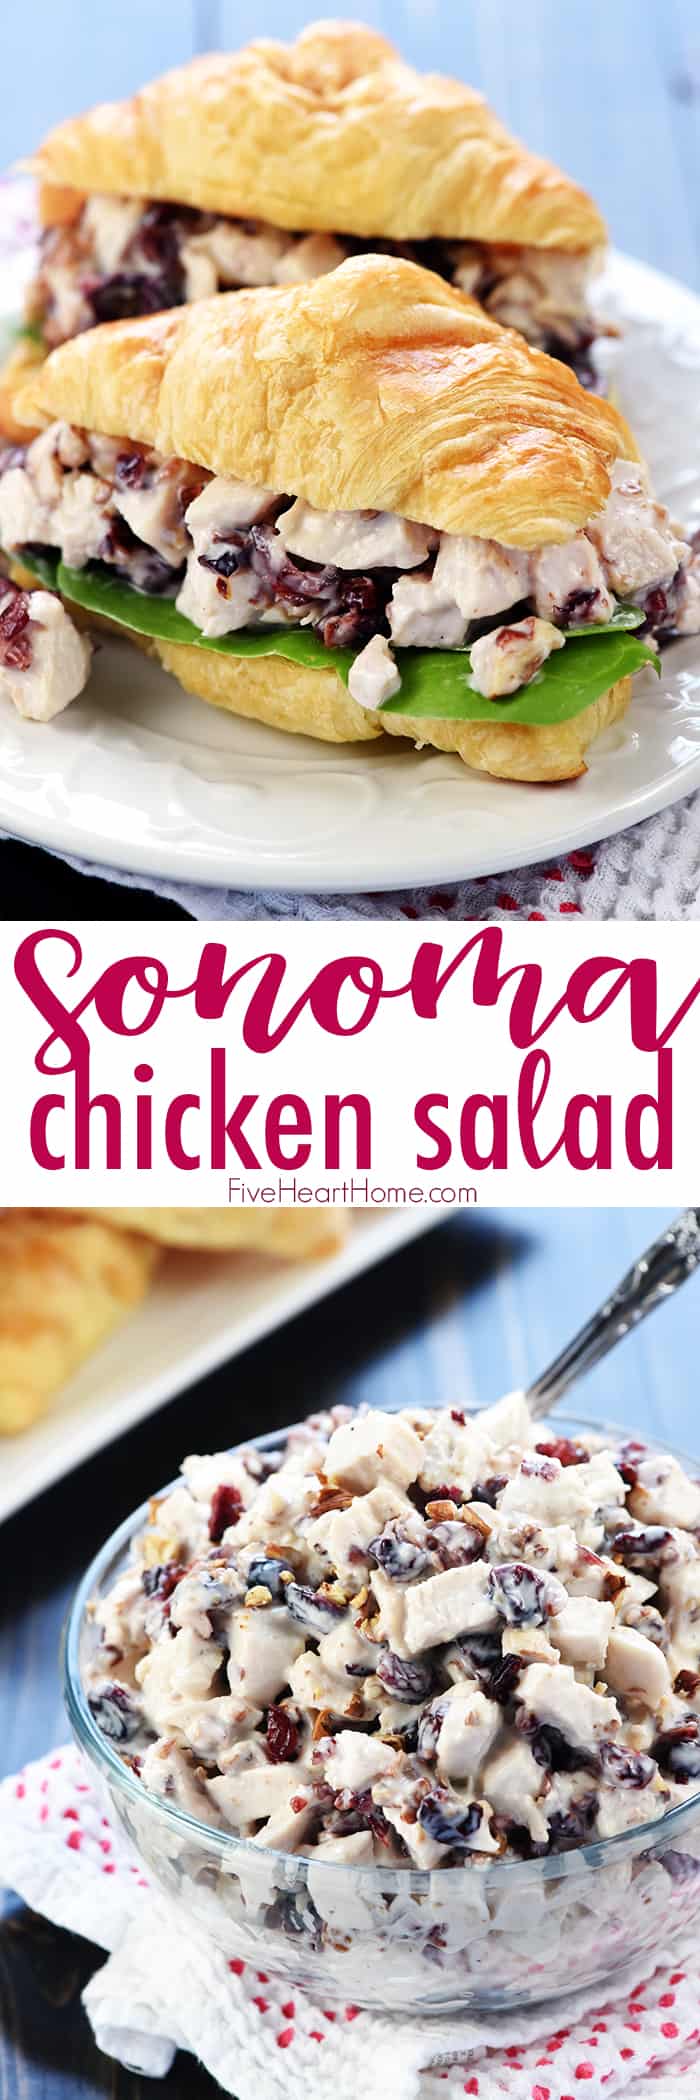 Sonoma Chicken Salad ~ studded with toasted pecans and dried cranberries in a lightened-up dressing including Greek yogurt & honey, this recipe makes scrumptious sandwiches for lunch, dinner, picnics, parties, or bridal and baby showers! | Five Heart Home.com via @fivehearthome